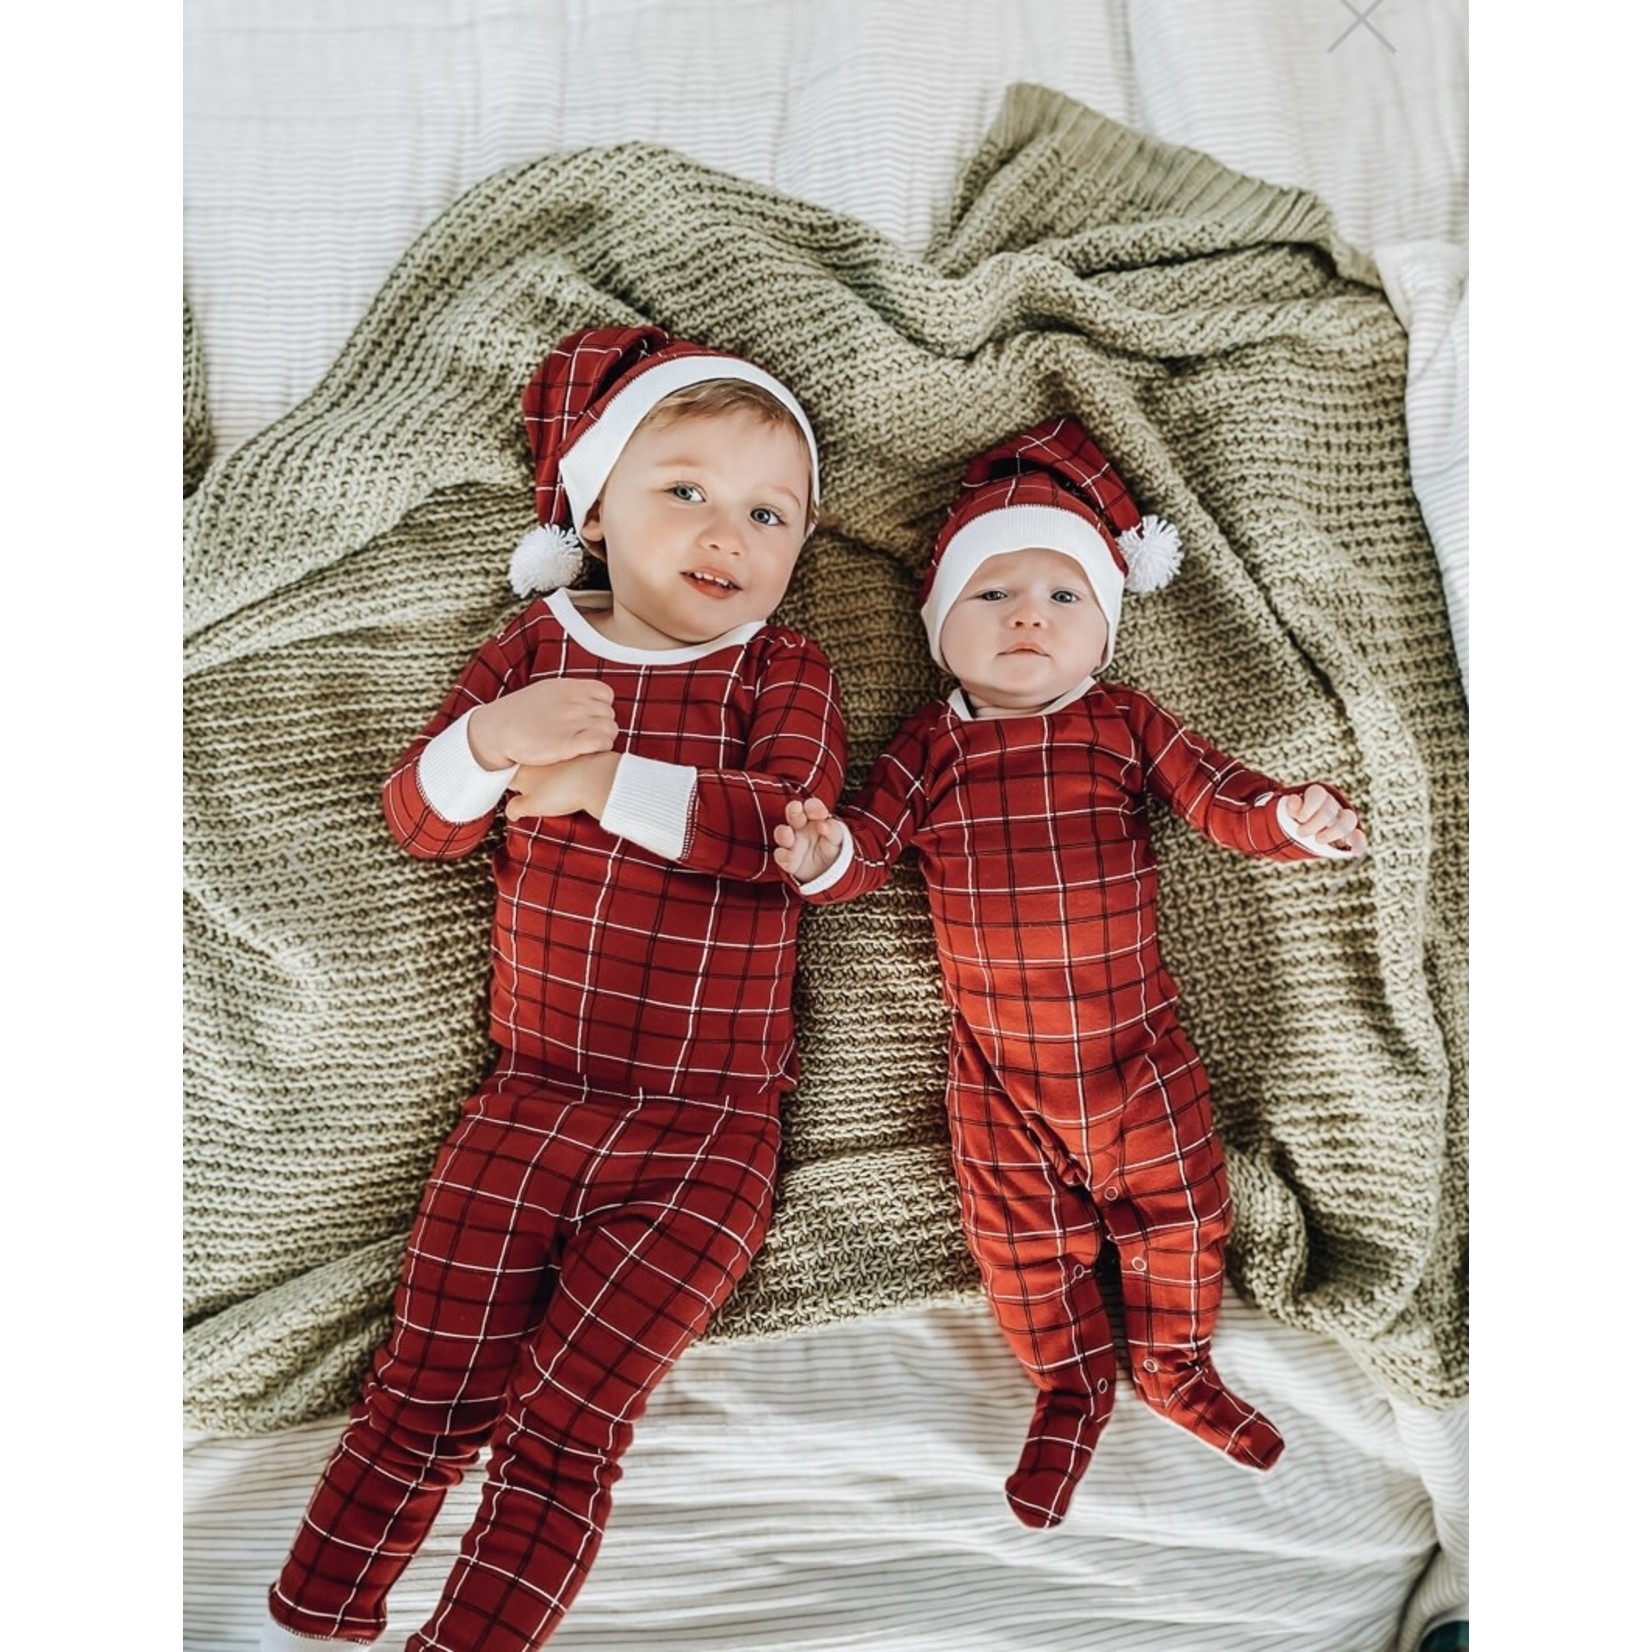 L’oved Baby L'oved Baby - Santa Baby Holiday PJ & Cap Set